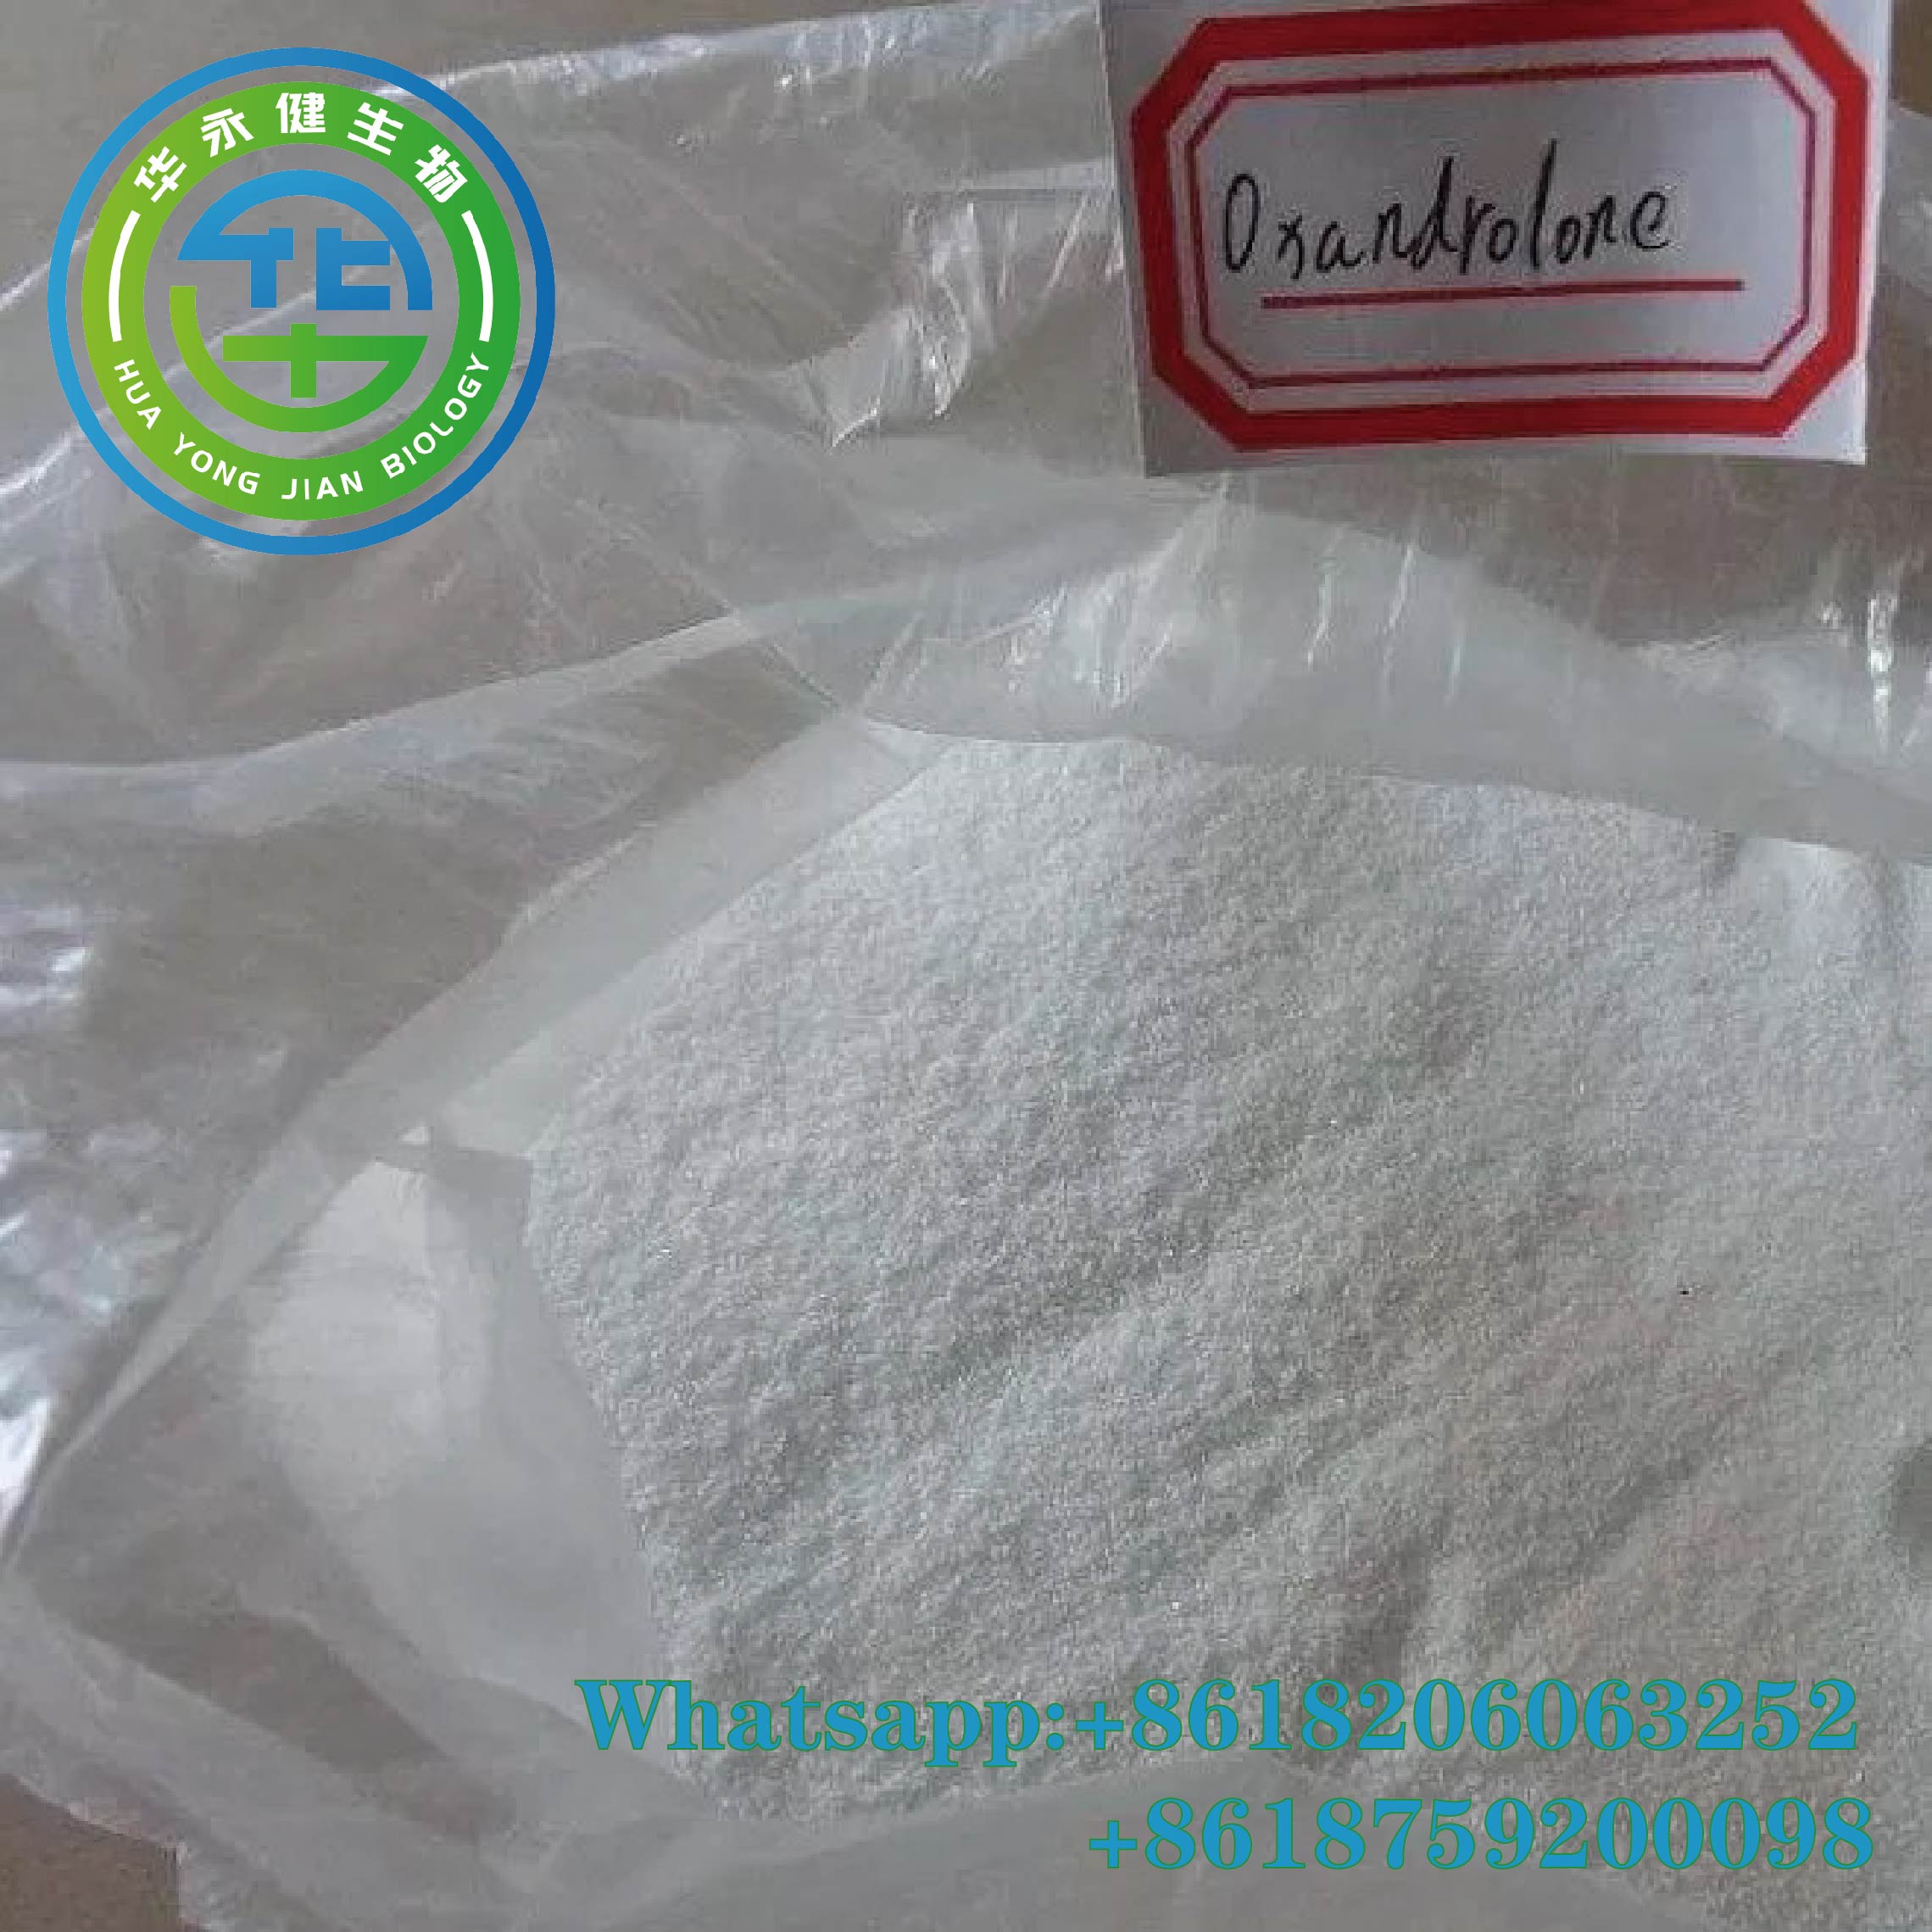 Oxandrolone CasNO.53-39-4 Best Muscle Gain Steroids Legit Anavar Powder For Female Weight Loss OXA